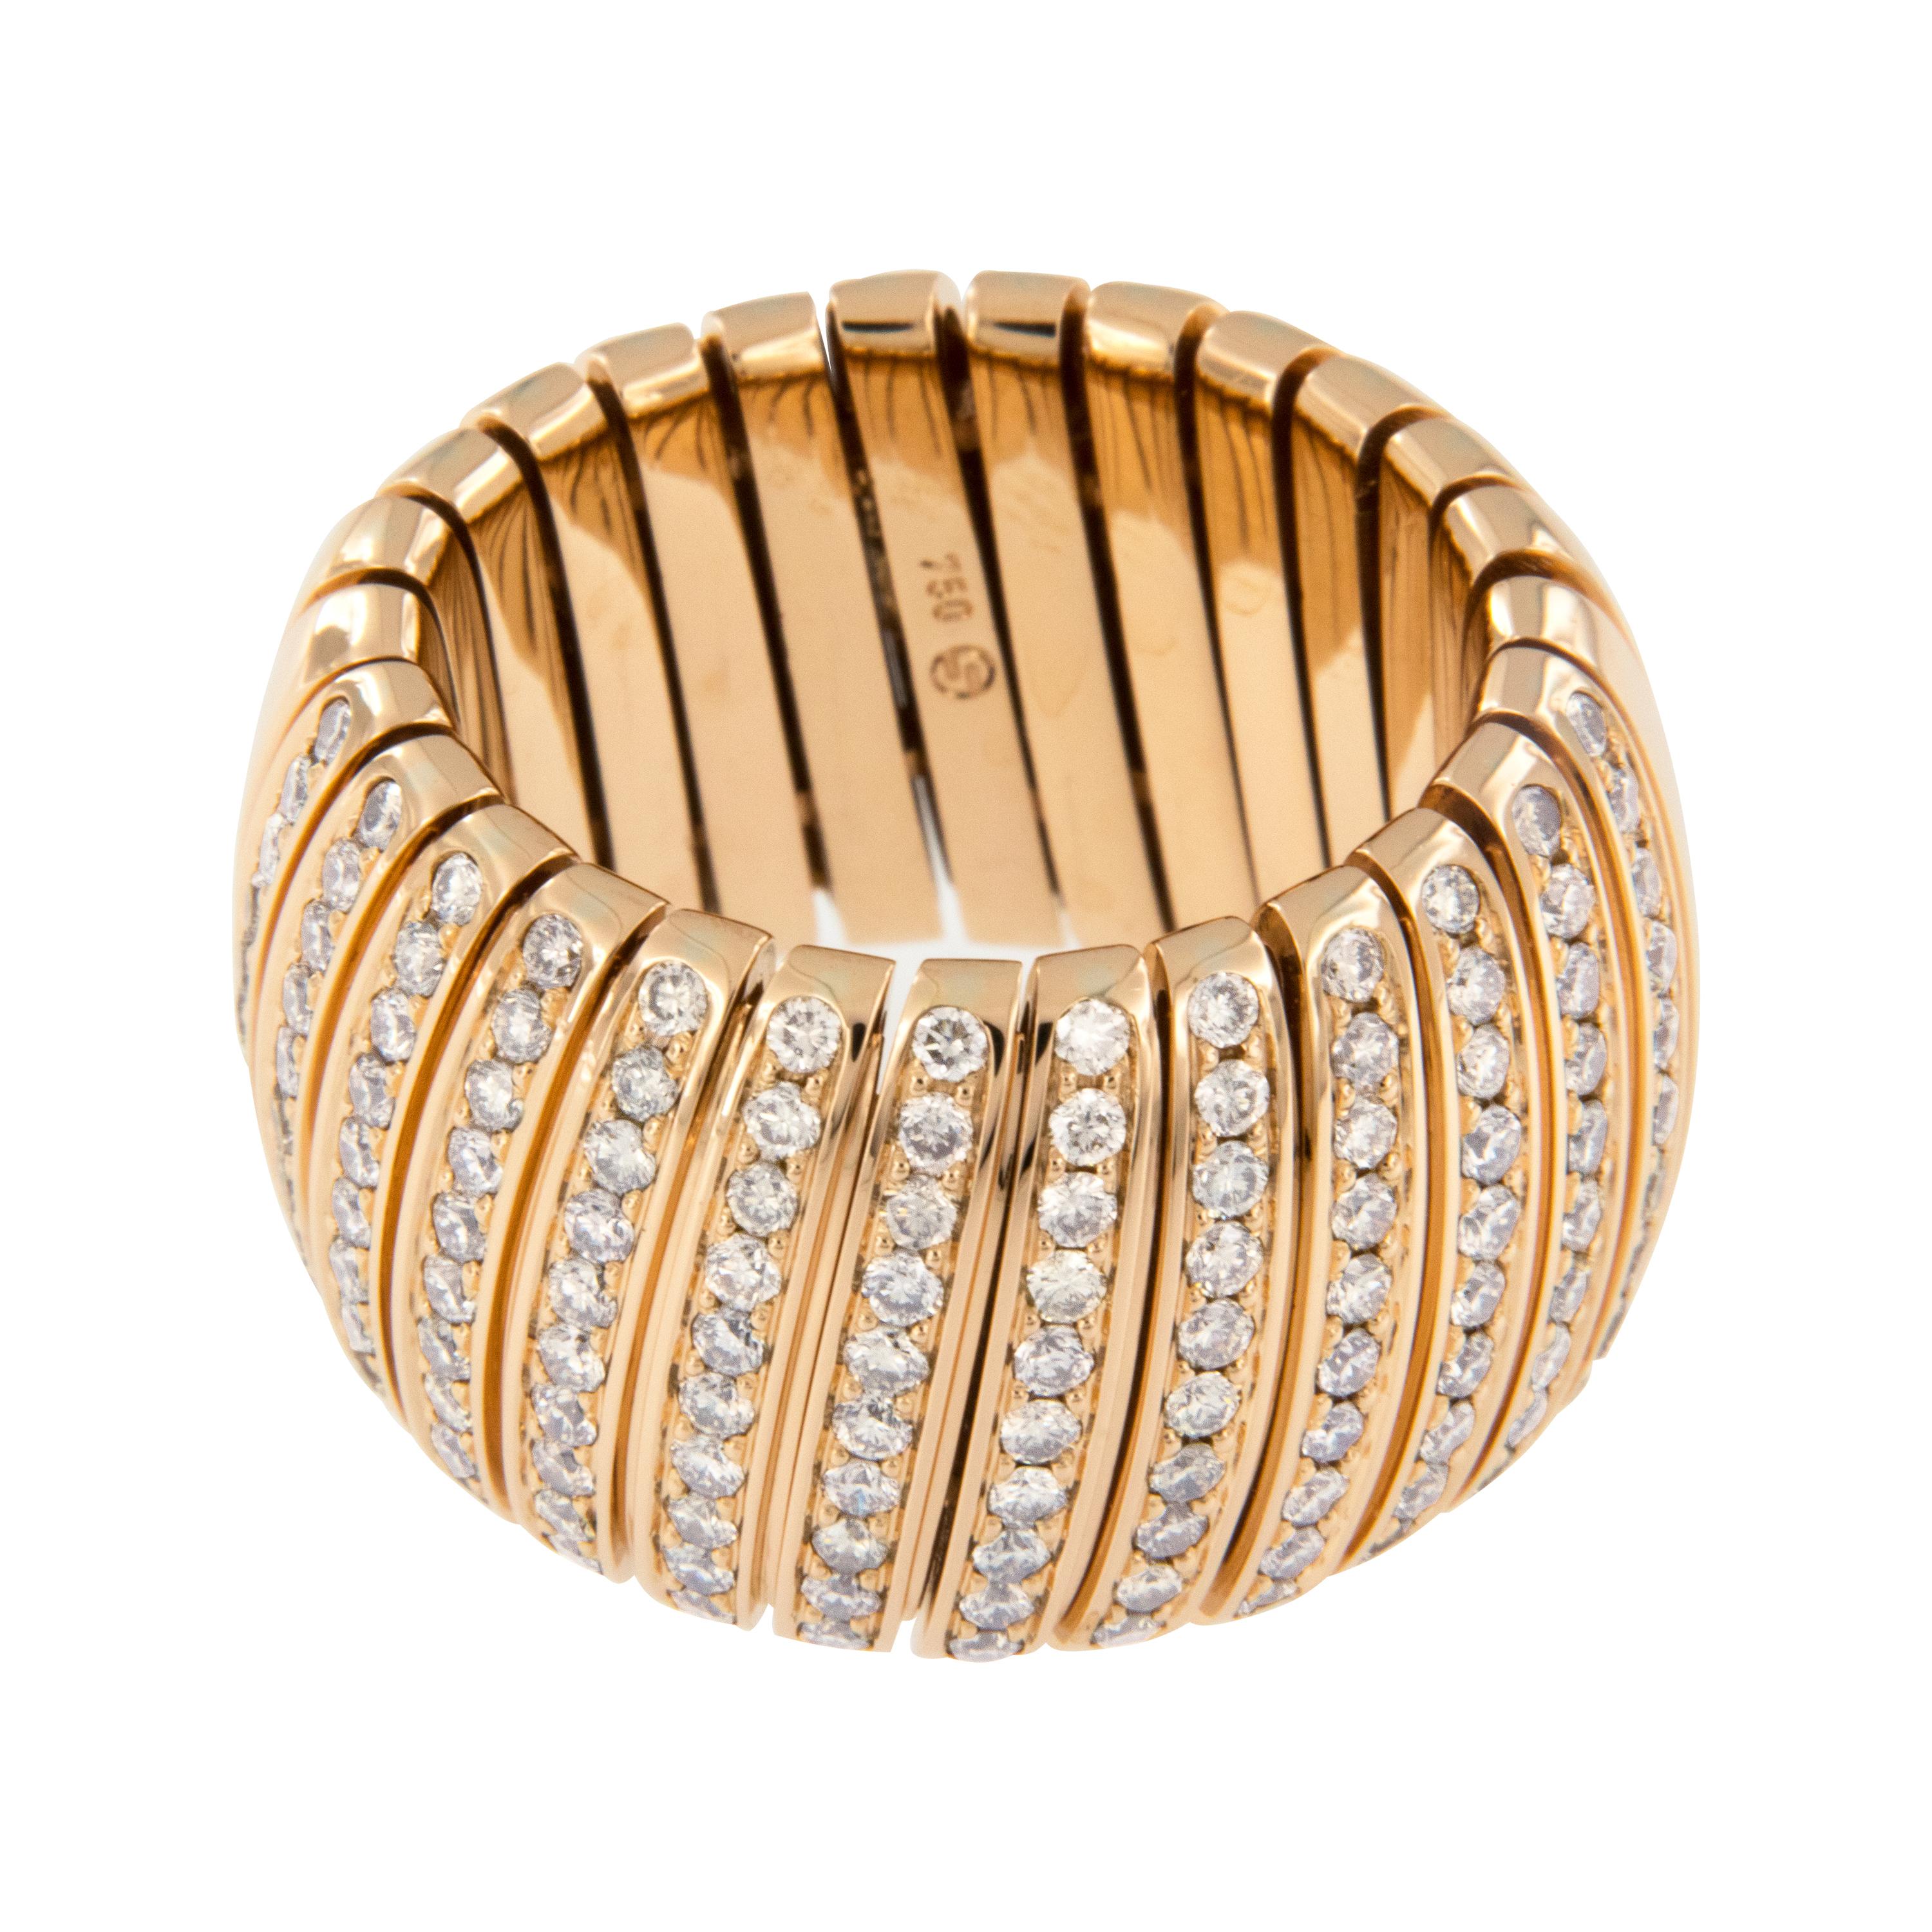 Since 1976, optimal quality and up-to-date design have always been the principles behind Scheffel-Schmuck. The superb German craftsmanship of this flexible wide band in 18 karat soft royal rose gold is further accentuated with 0.62 Cttw of fine